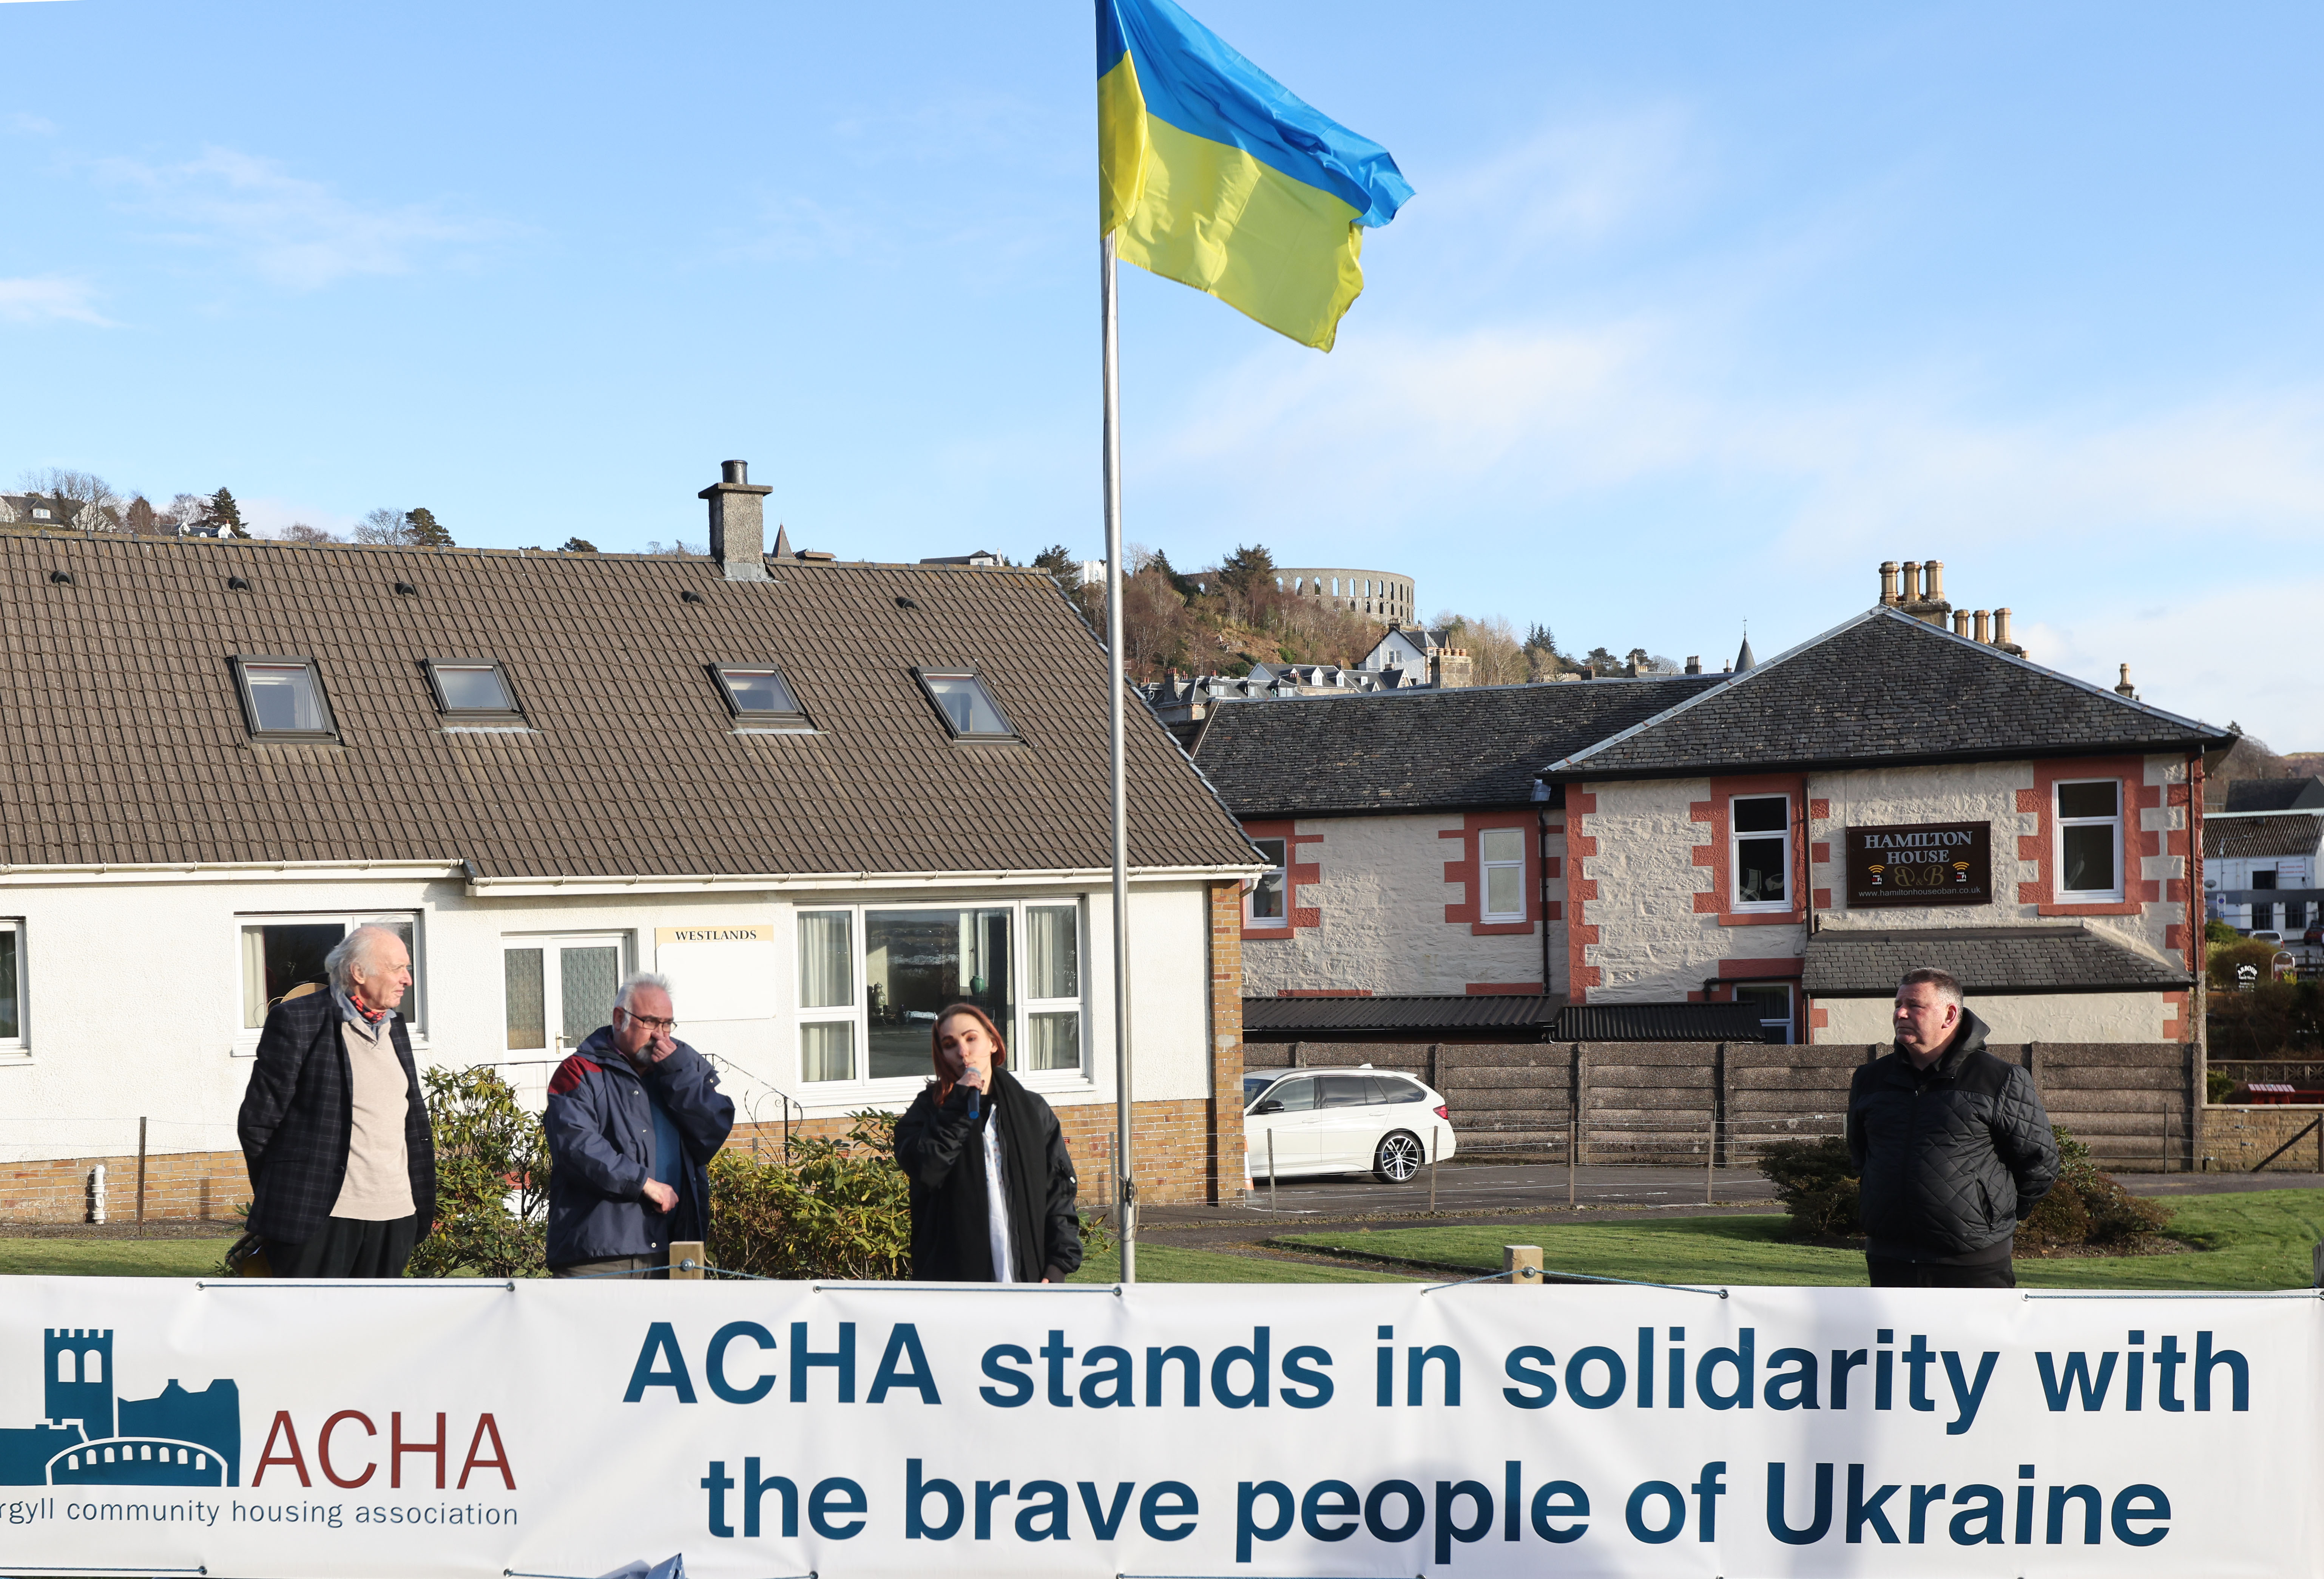 ACHA raises a banner and flag in solidarity with the people of Ukraine